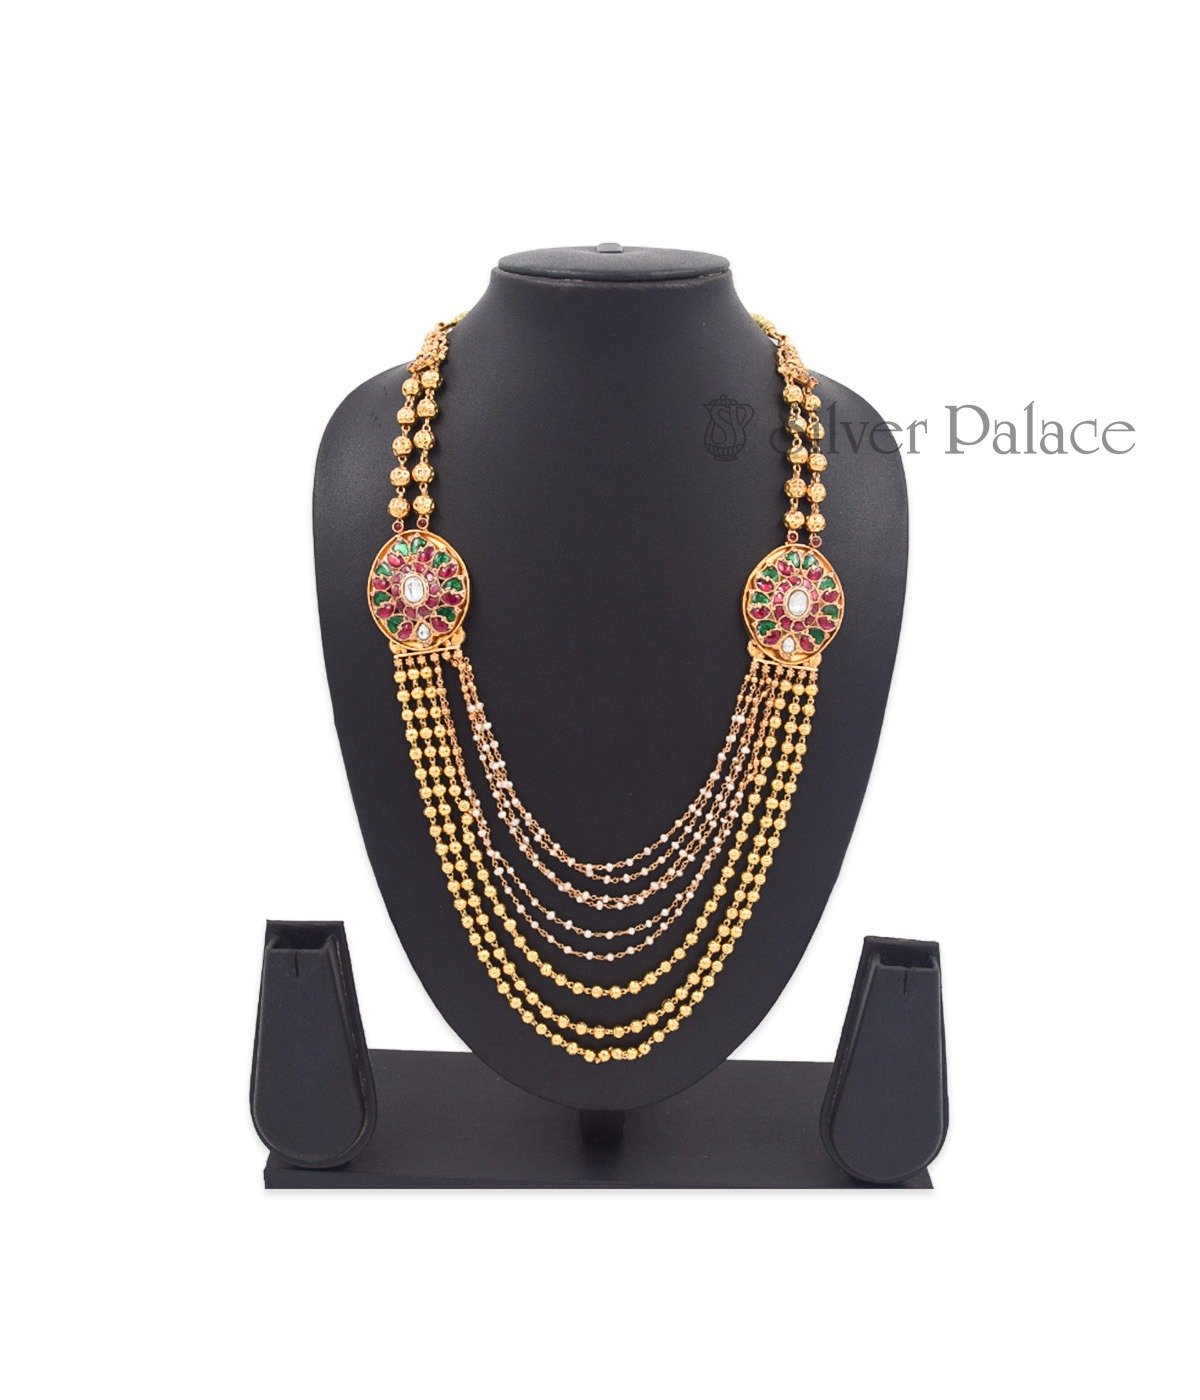 GOLD POLISHED TRADITIONAL TEMPLE JEWELLERY NECKLACE 